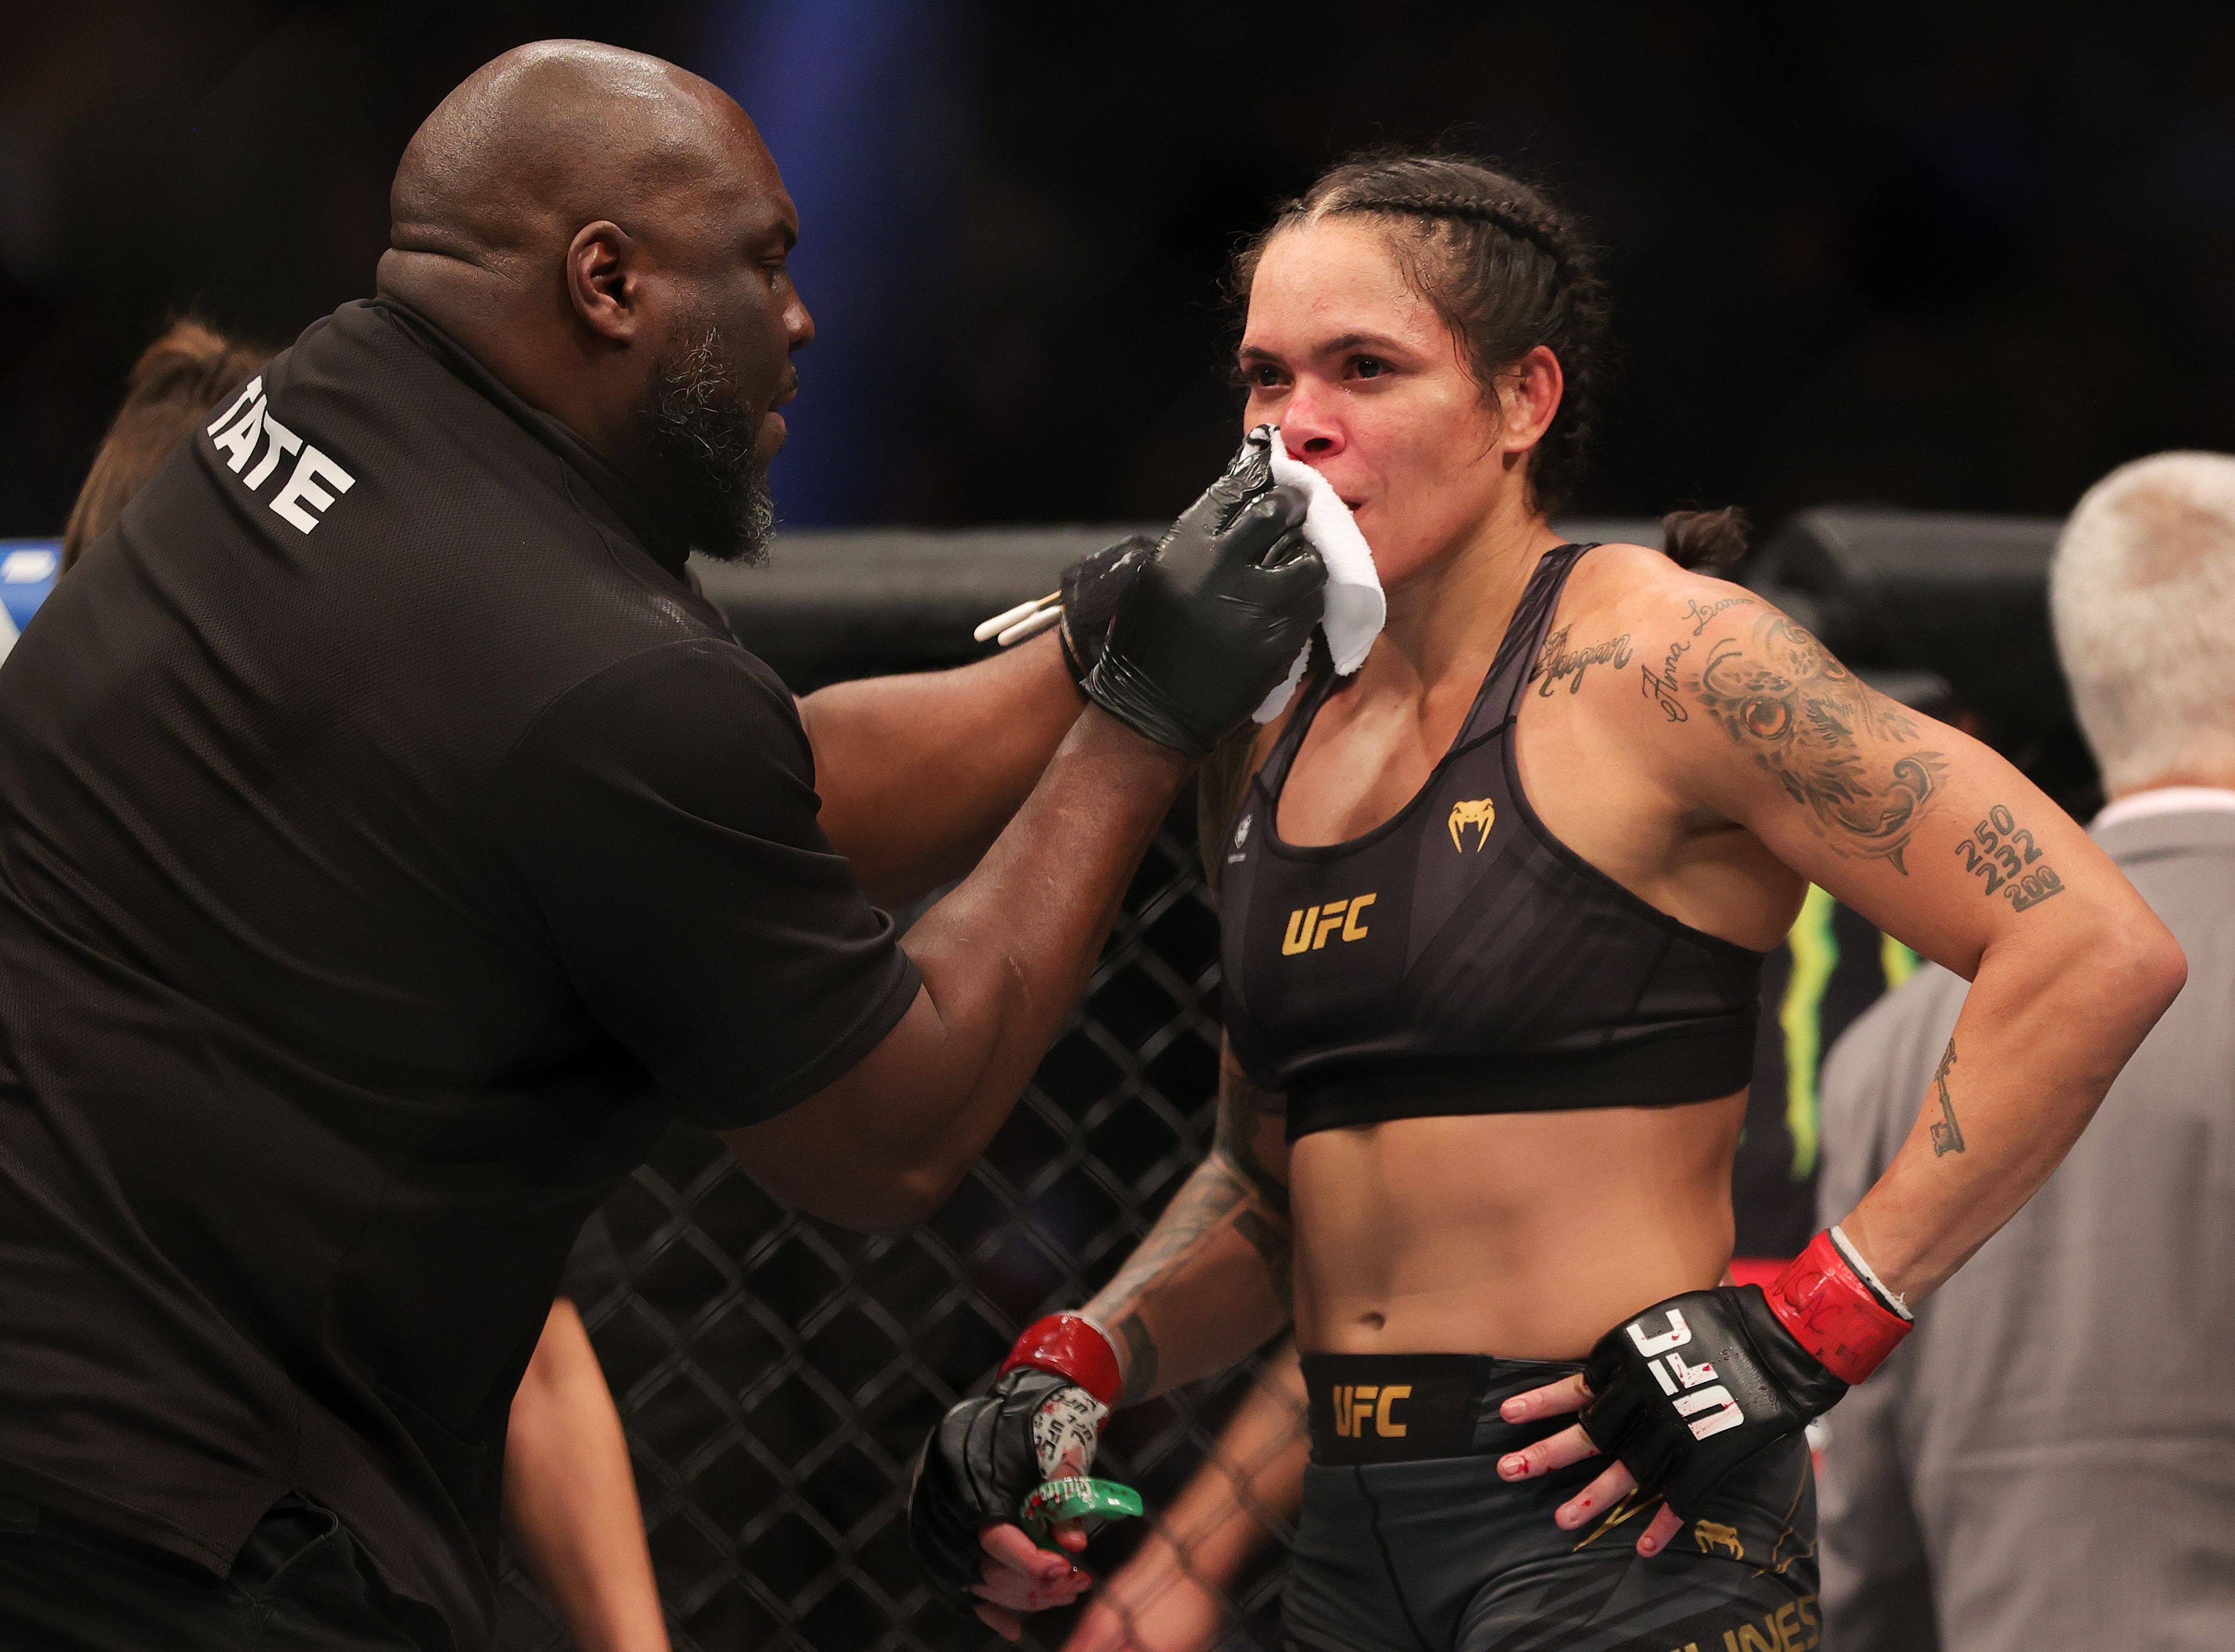 Amanda Nunes is tended to following her loss to Julianna Pena at UFC 269. Photo: AFP